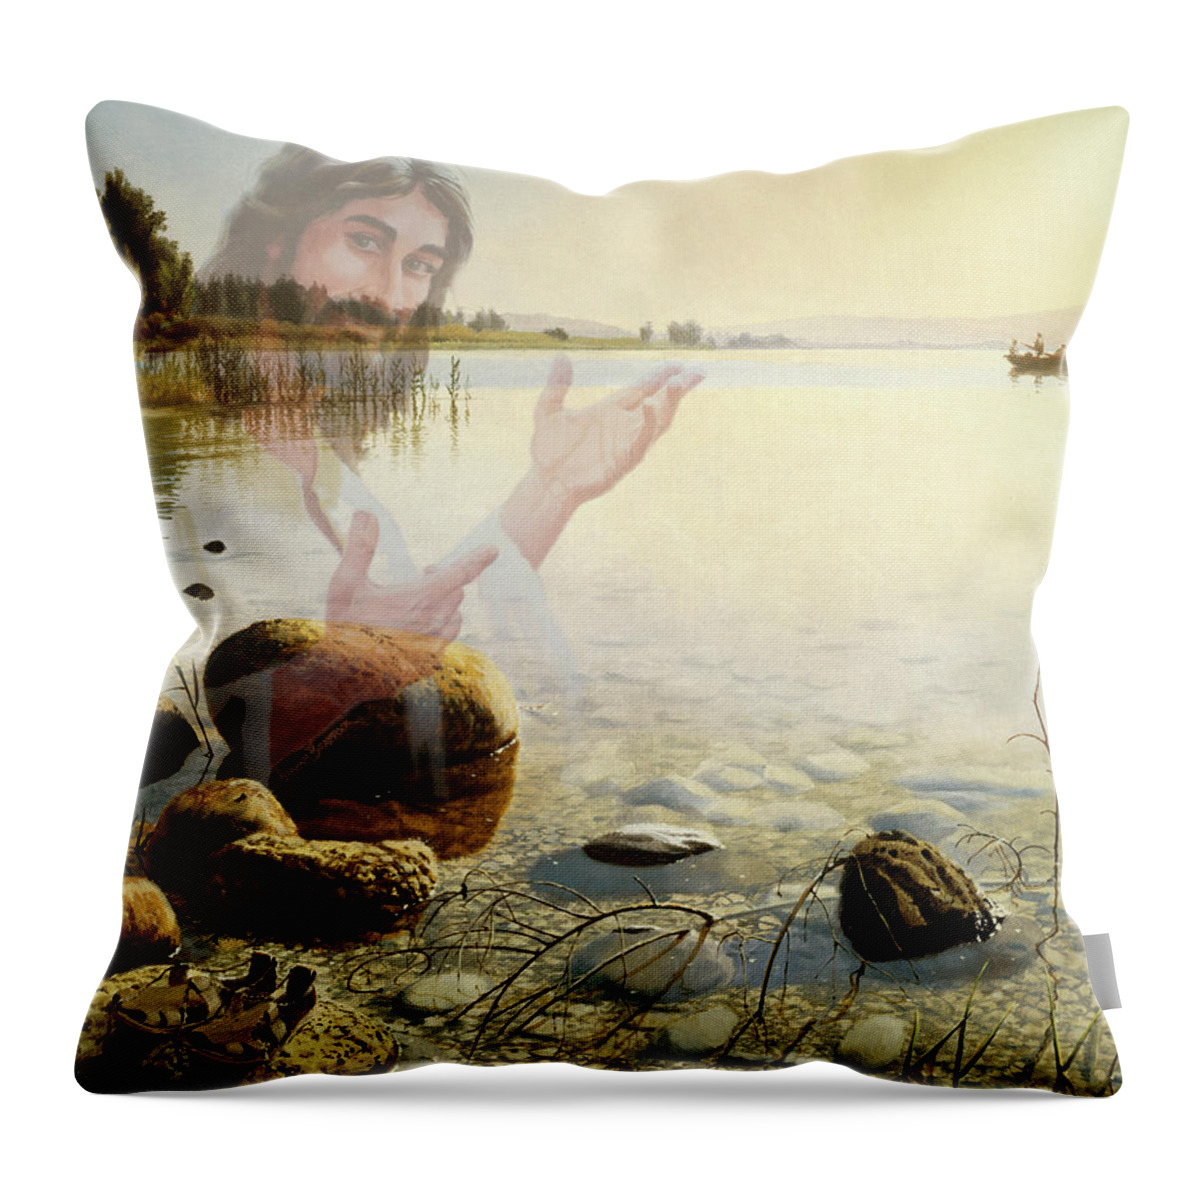 Jesus Throw Pillow featuring the painting Jesus, Come Follow Me by Graham Braddock